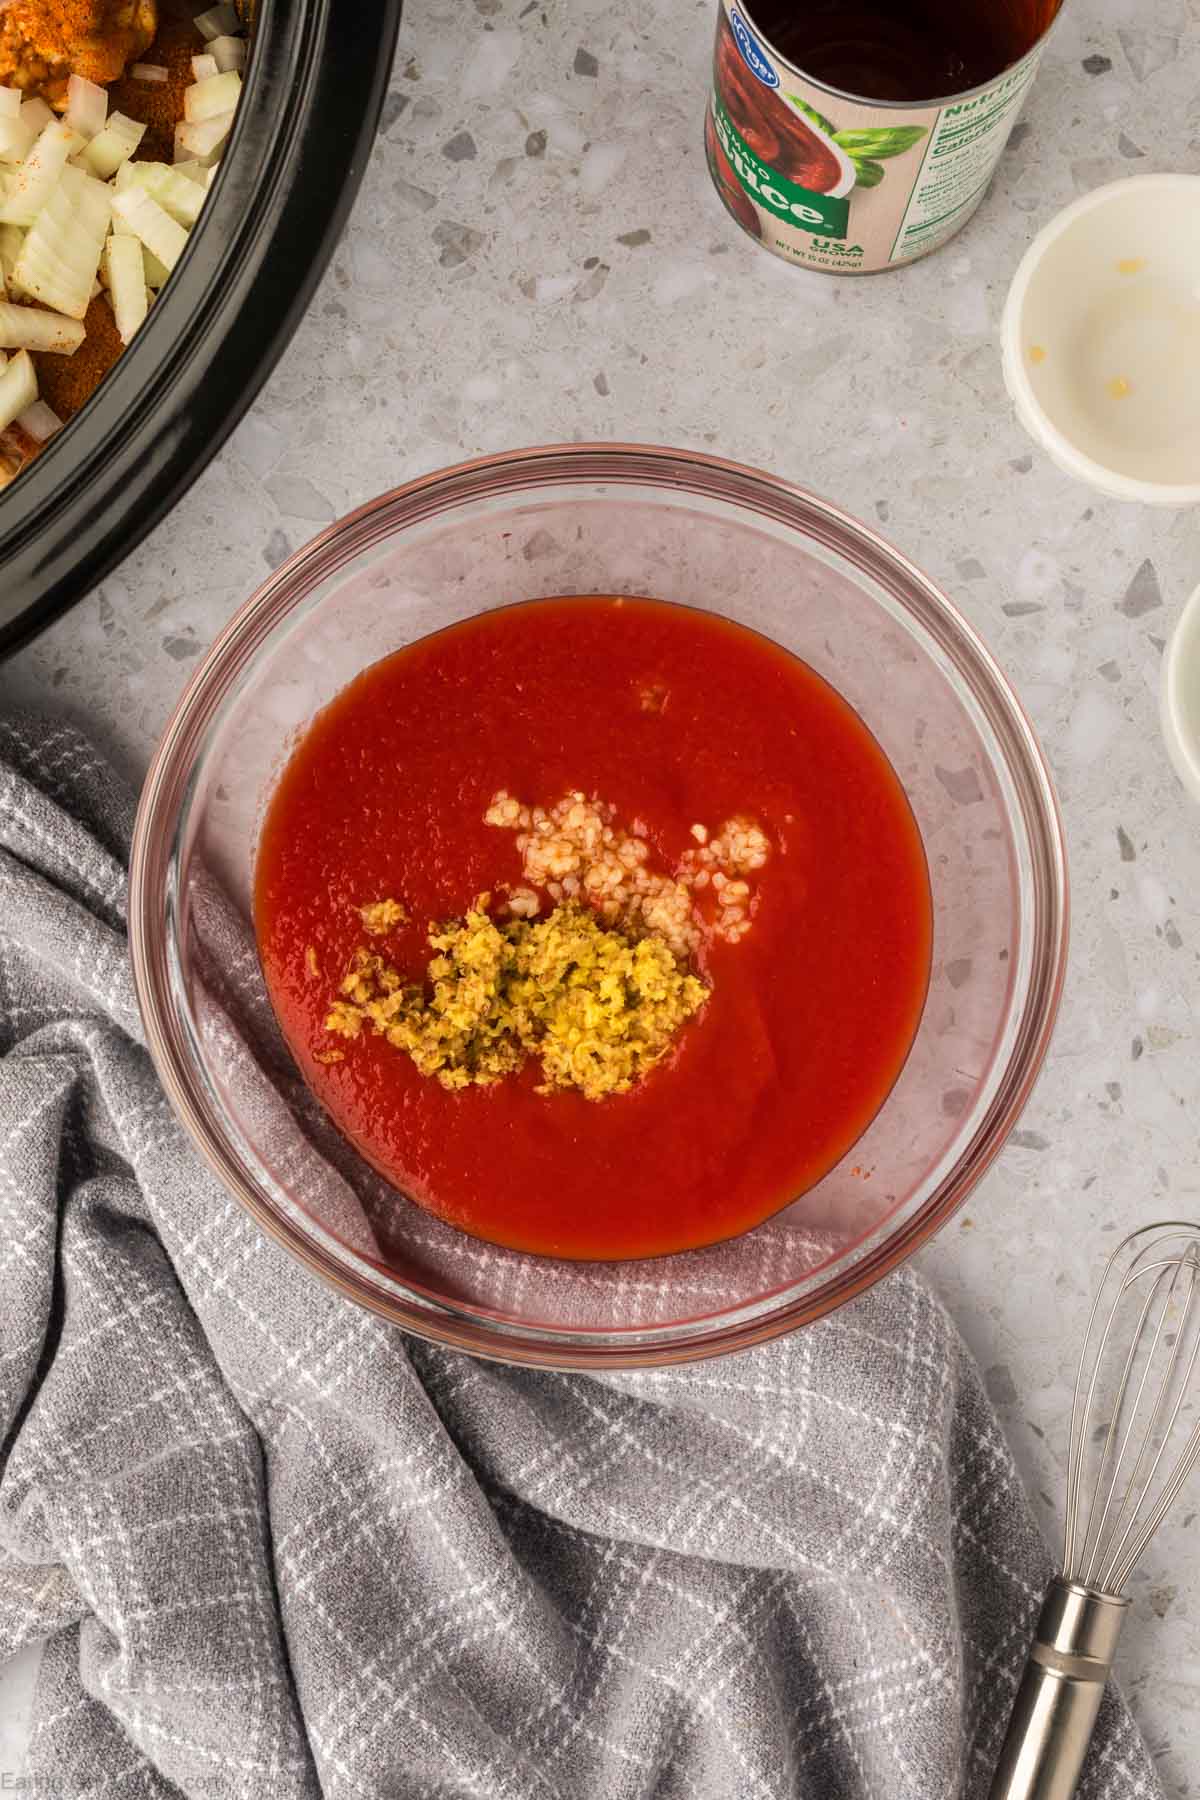 Combining the sauce with the seasoning in a bowl